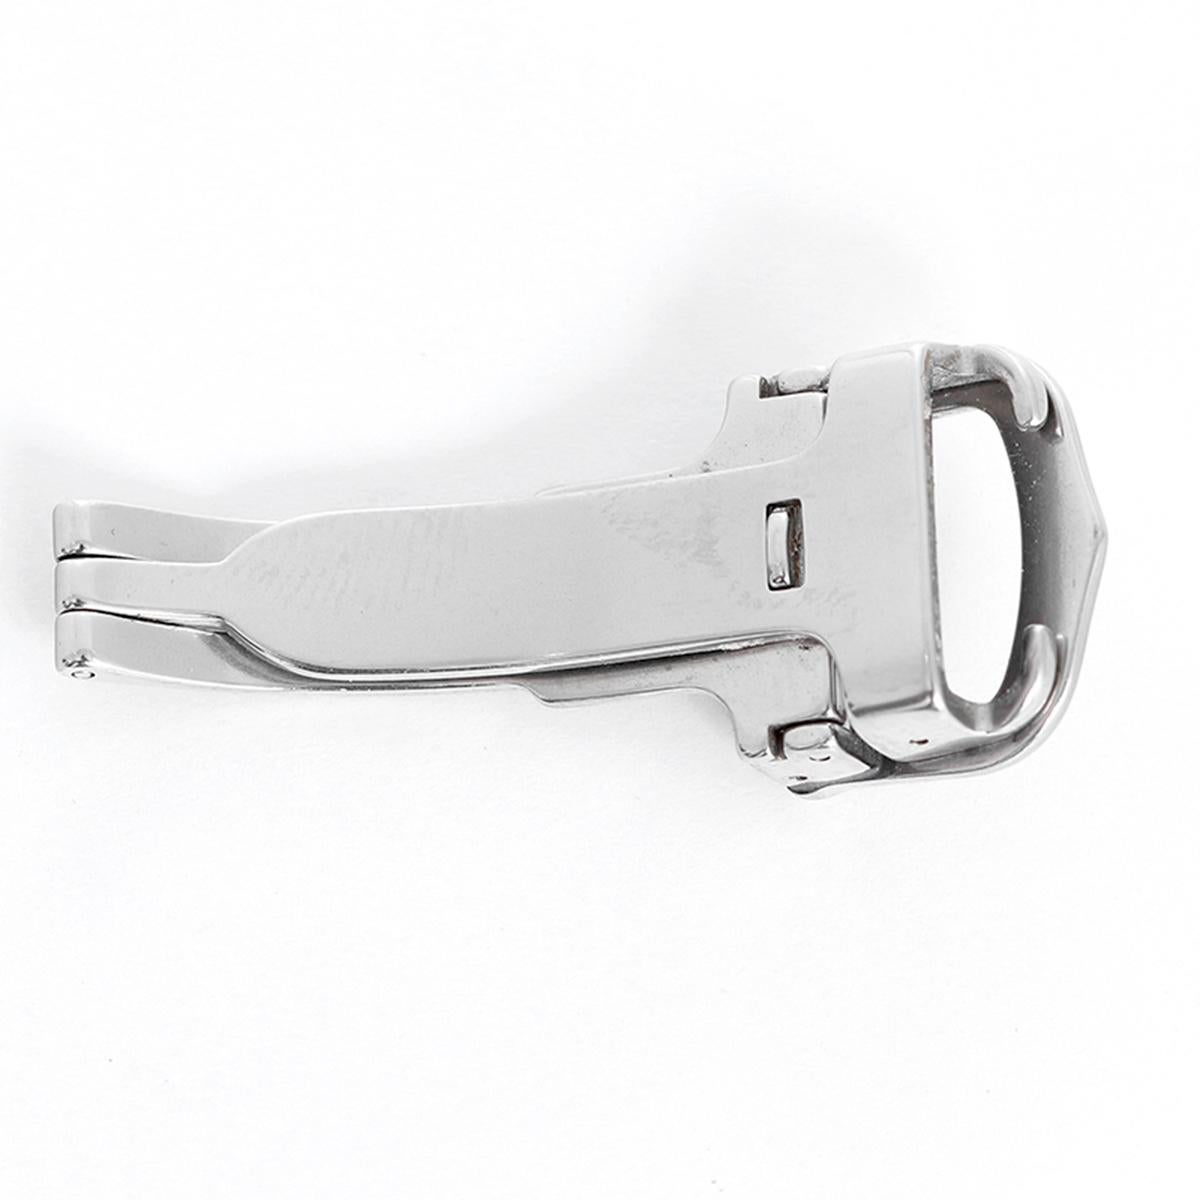 Cartier Stainless Steel Deployant Clasp/Buckle 13mm -  Stainless steel genuine Cartier 13mm deployant clasp/buckle.